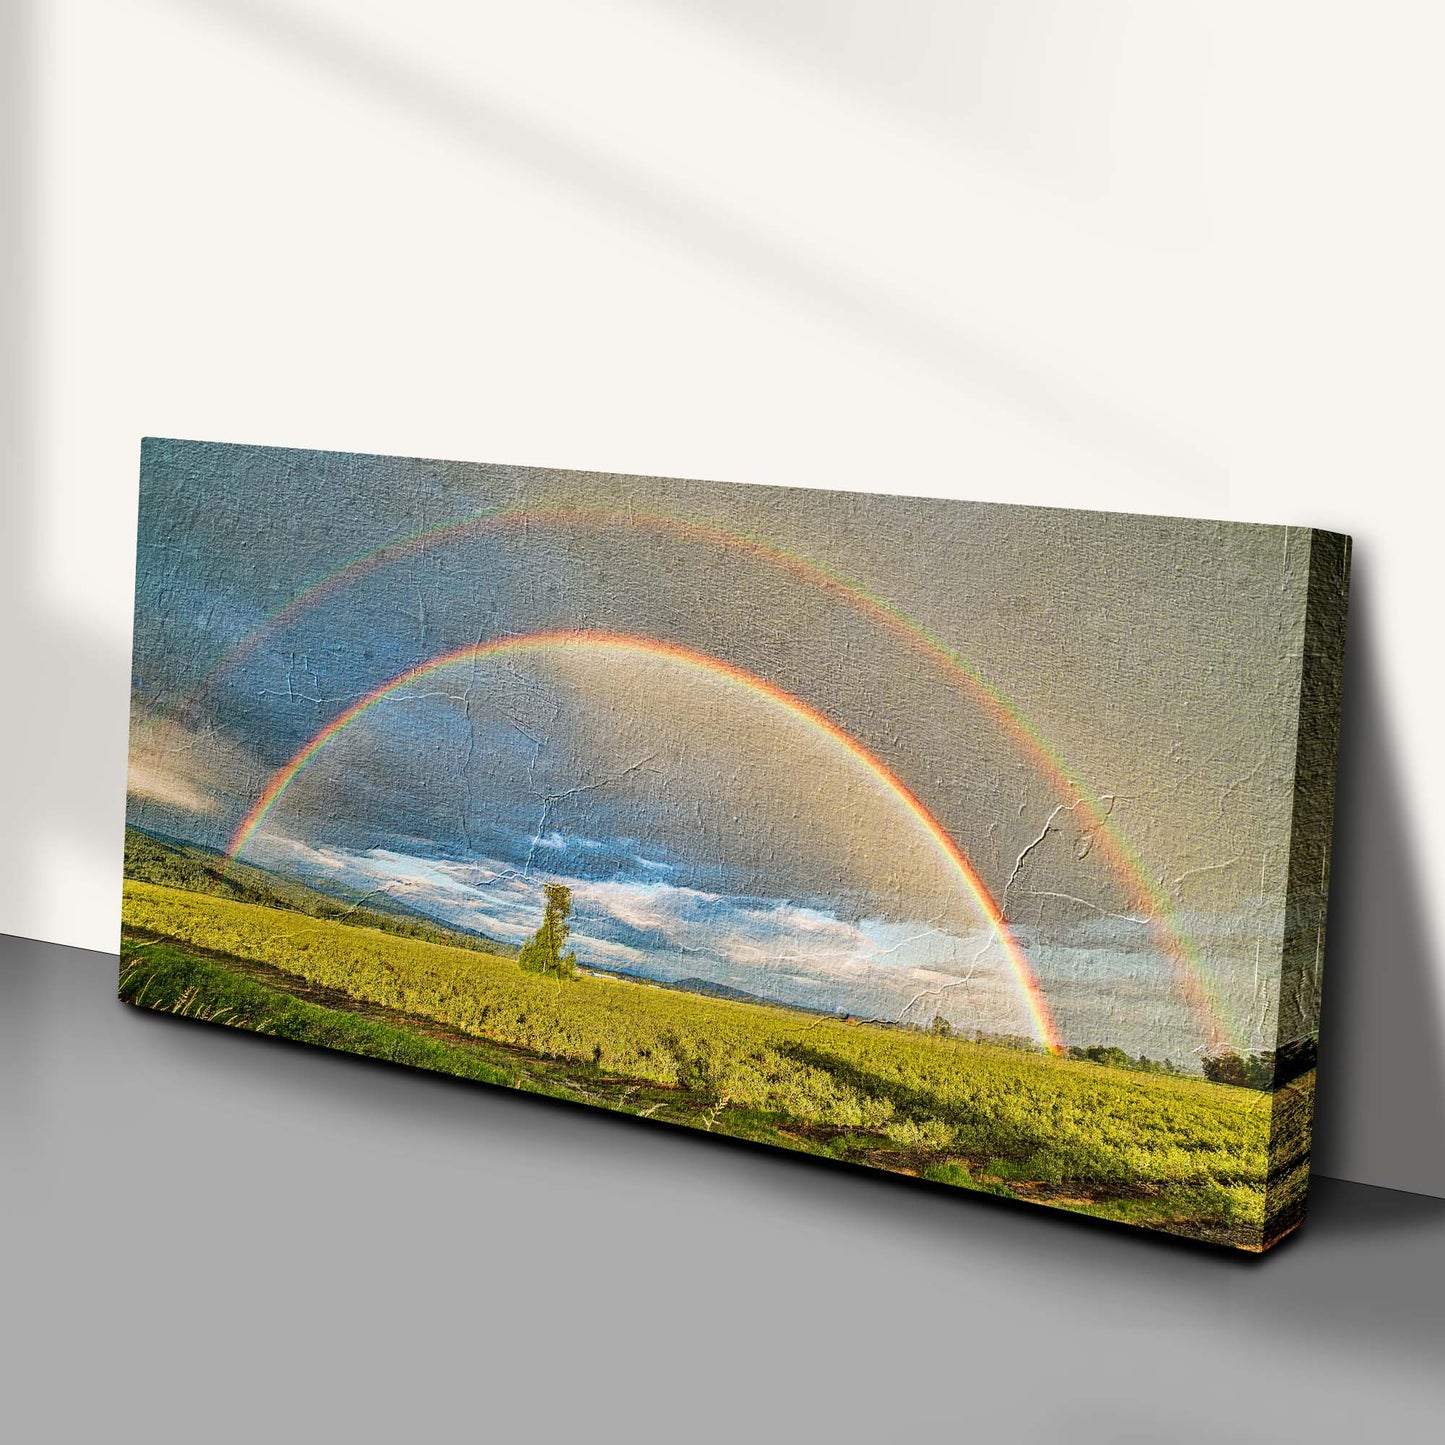 Double Rainbow Over The Field Canvas Wall Art Style 1 - Image by Tailored Canvases